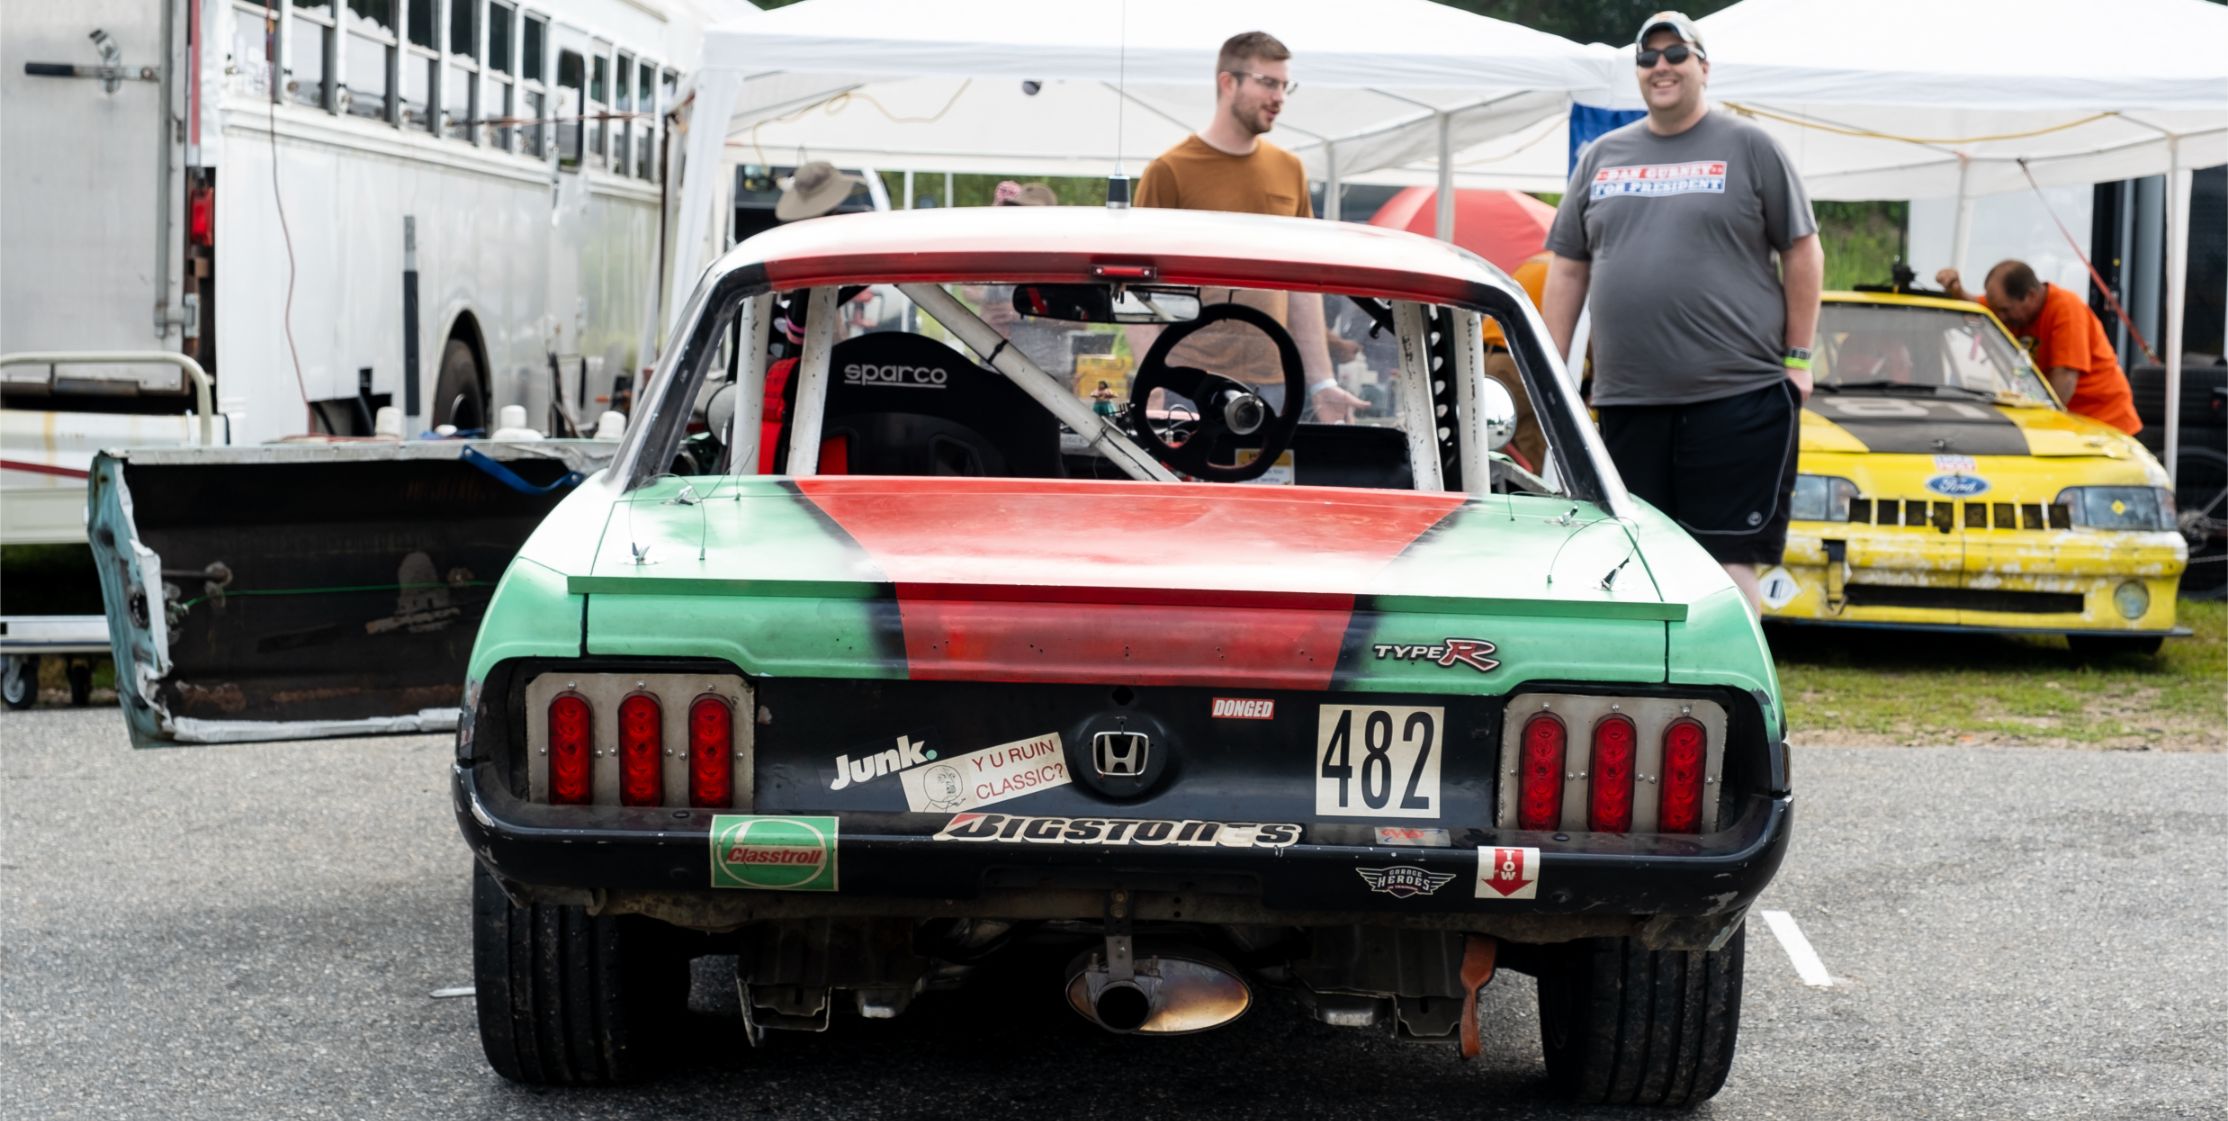 Here's How to Actually Build a Honda-Swapped, Mid-Engine Mustang